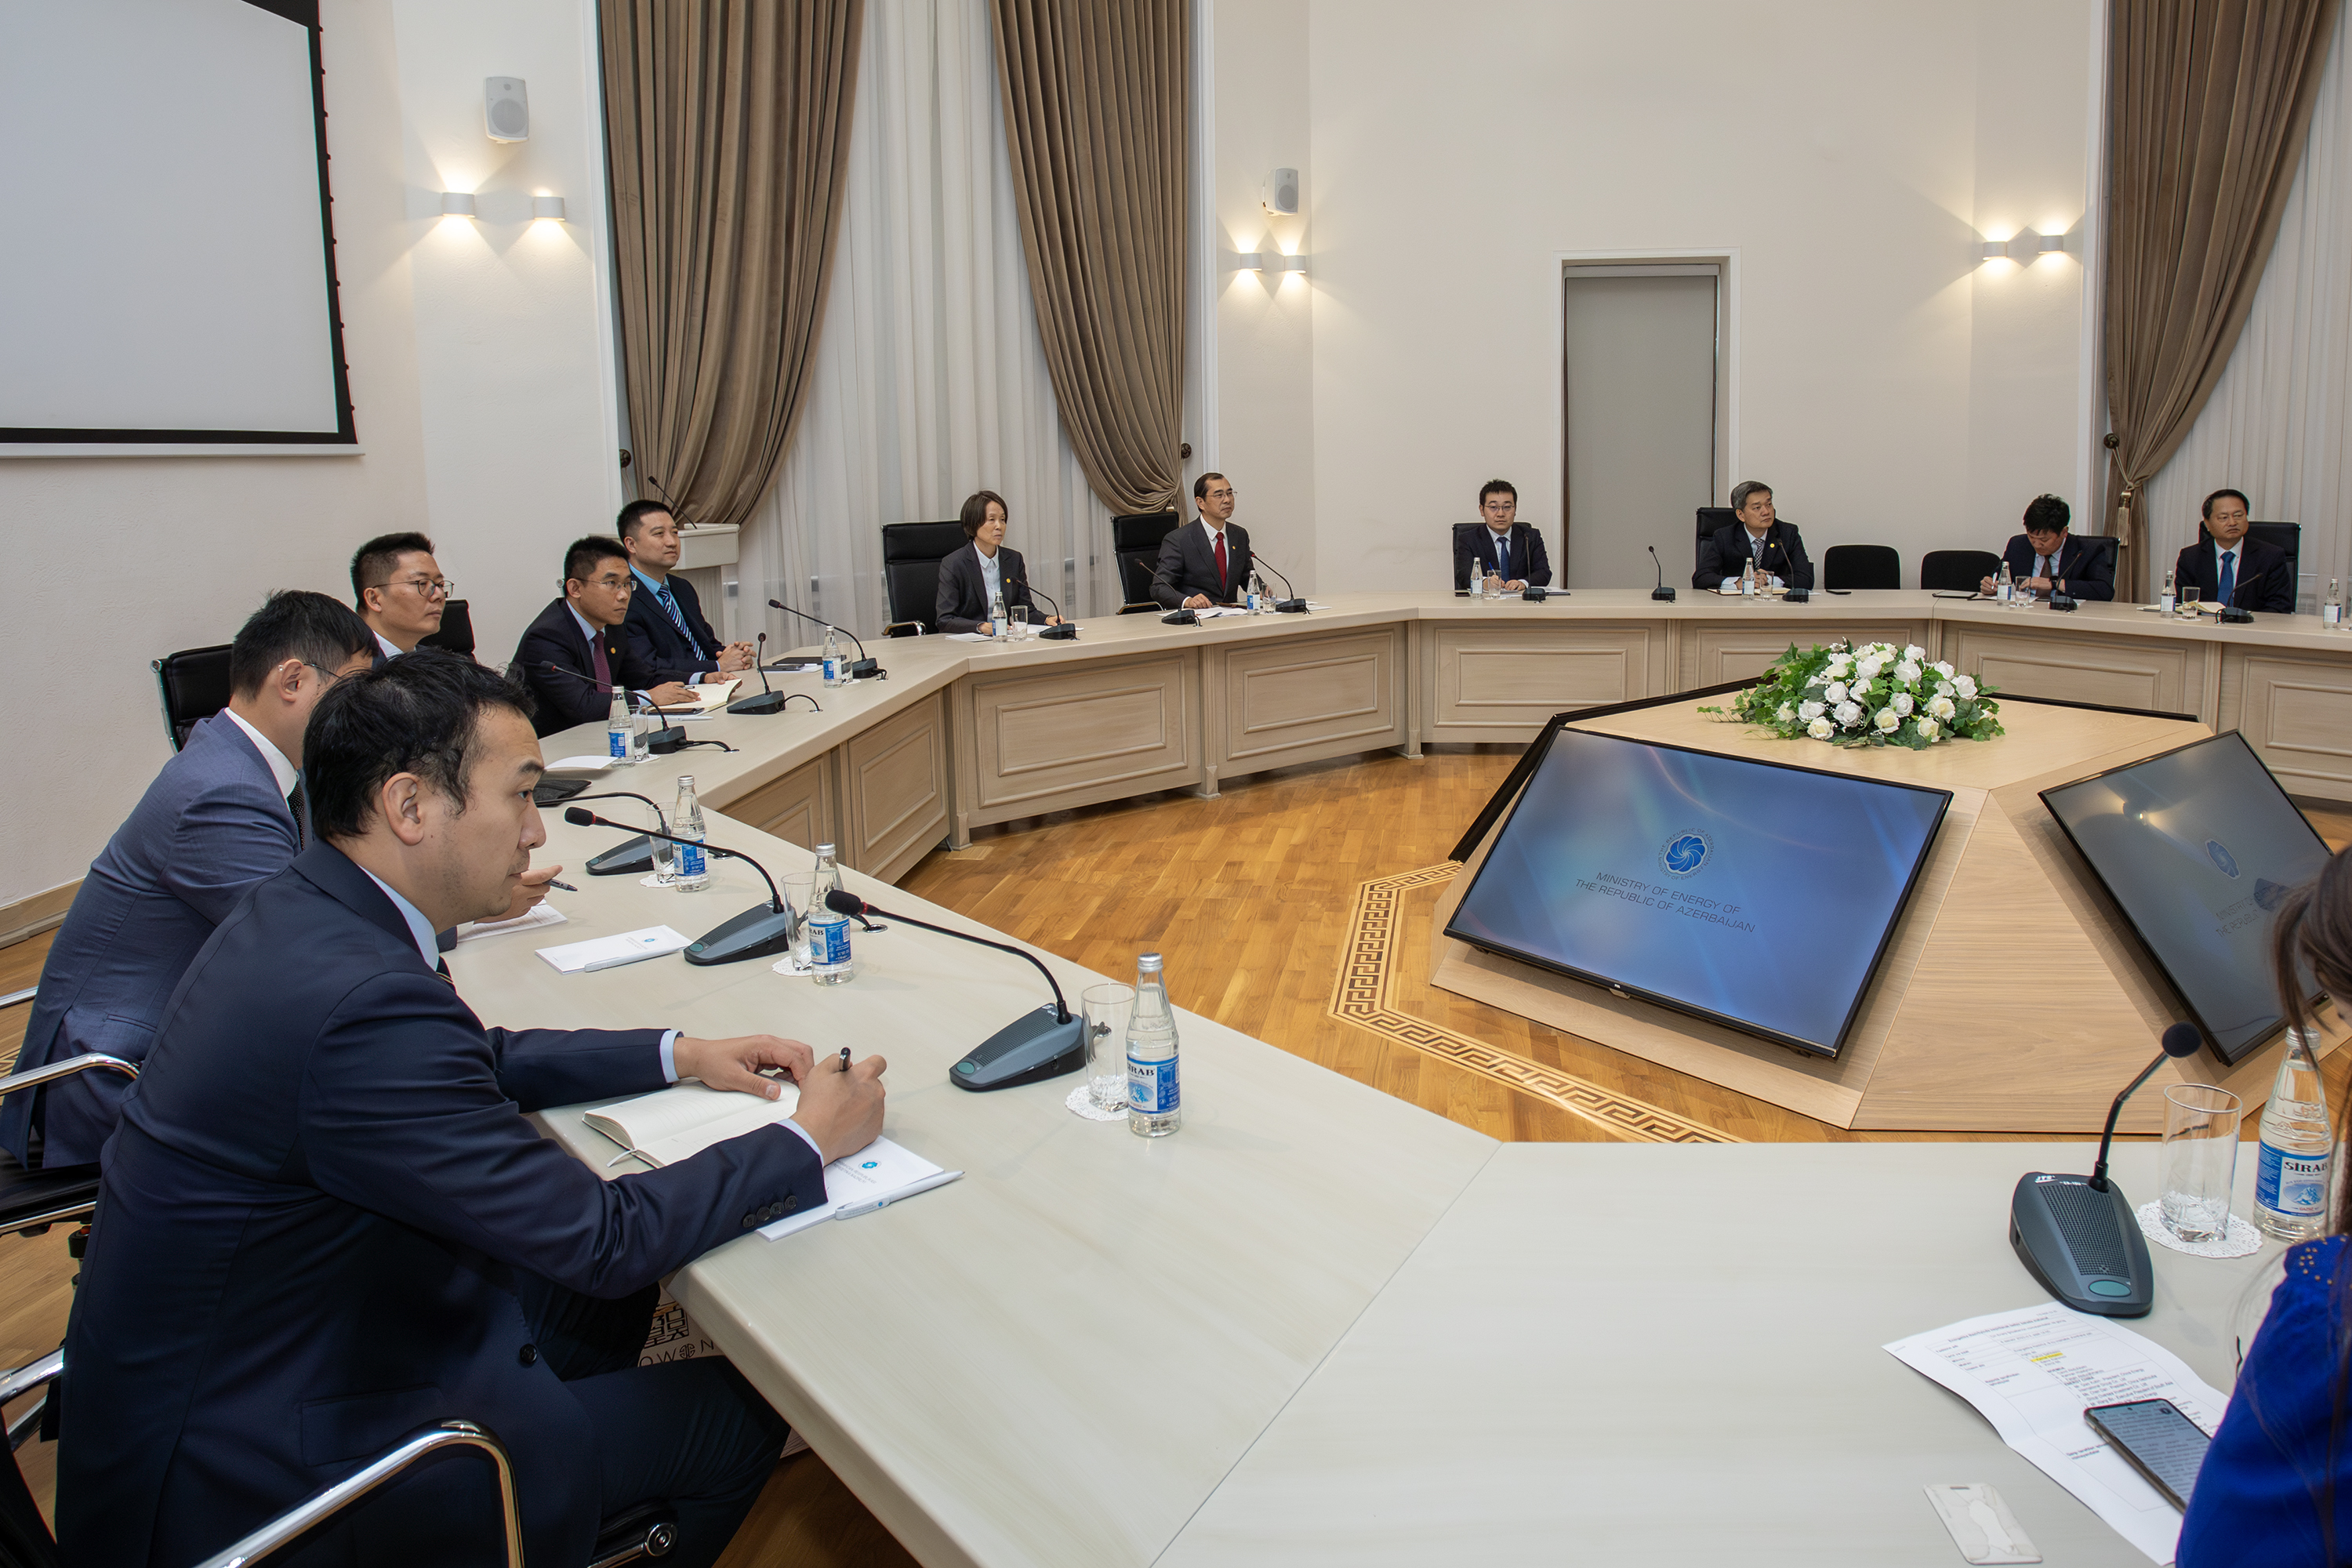 Cooperation on energy storage systems was discussed with China Energy